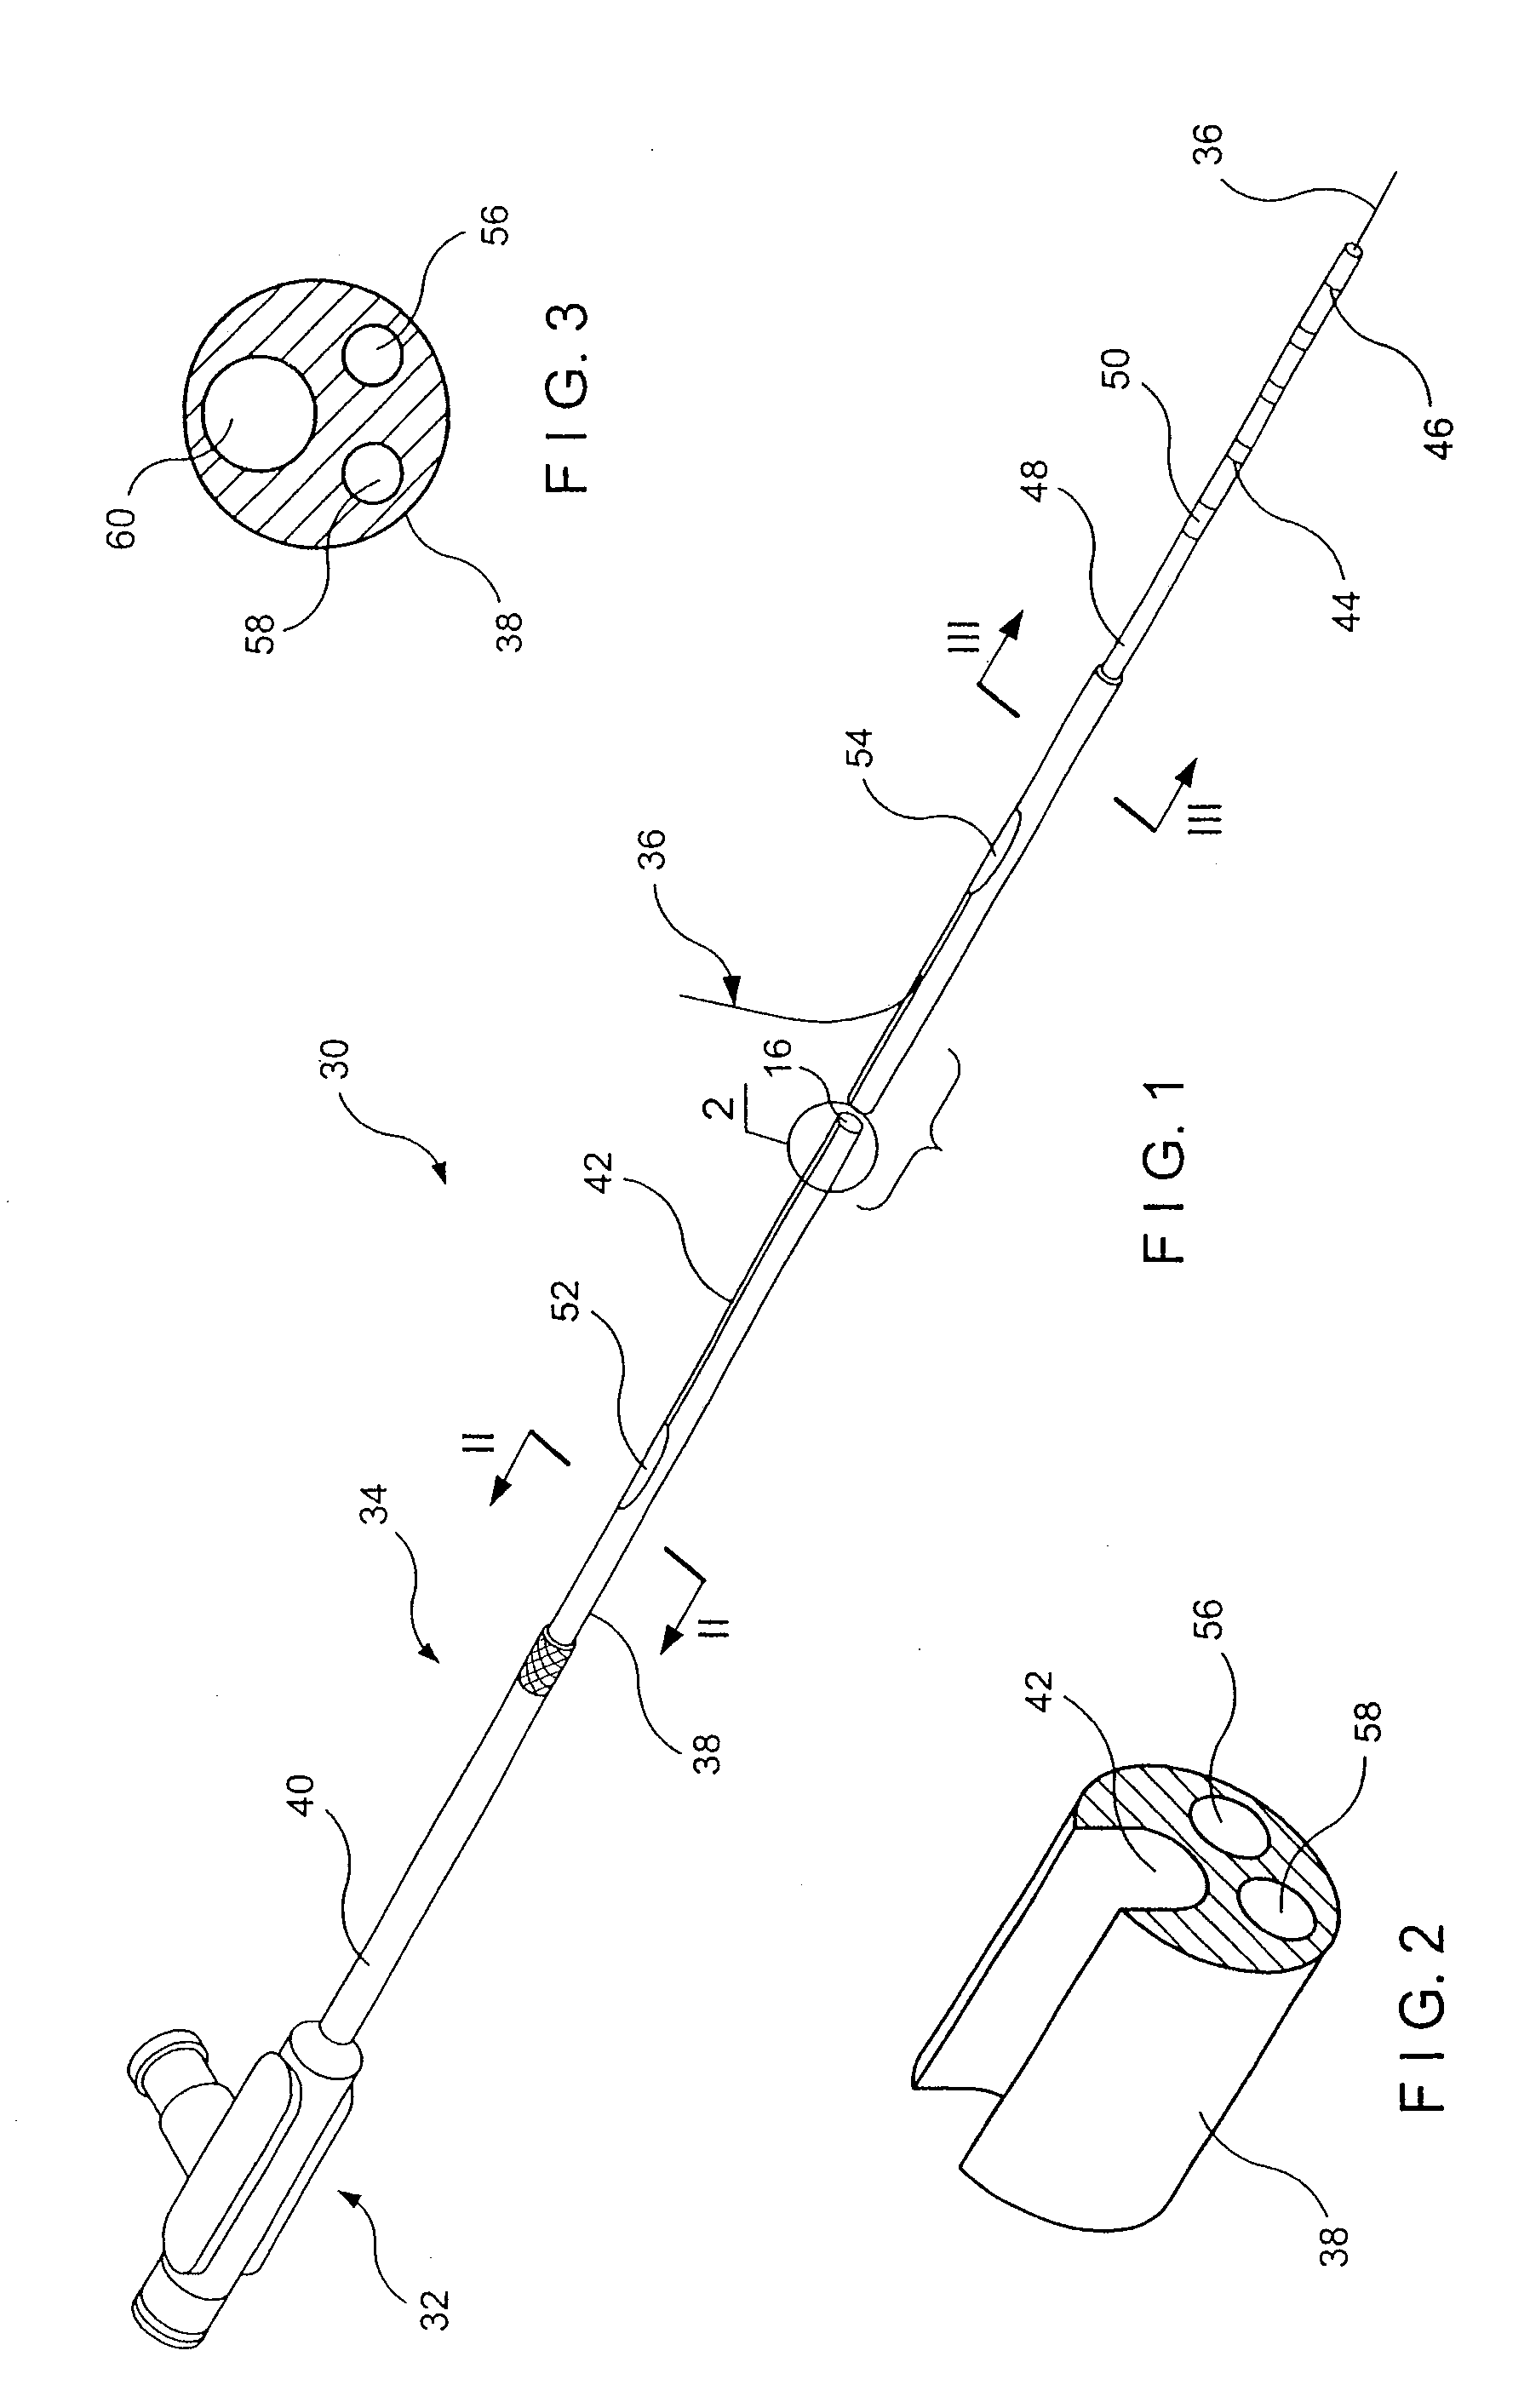 Guidewire Locking Device and Method